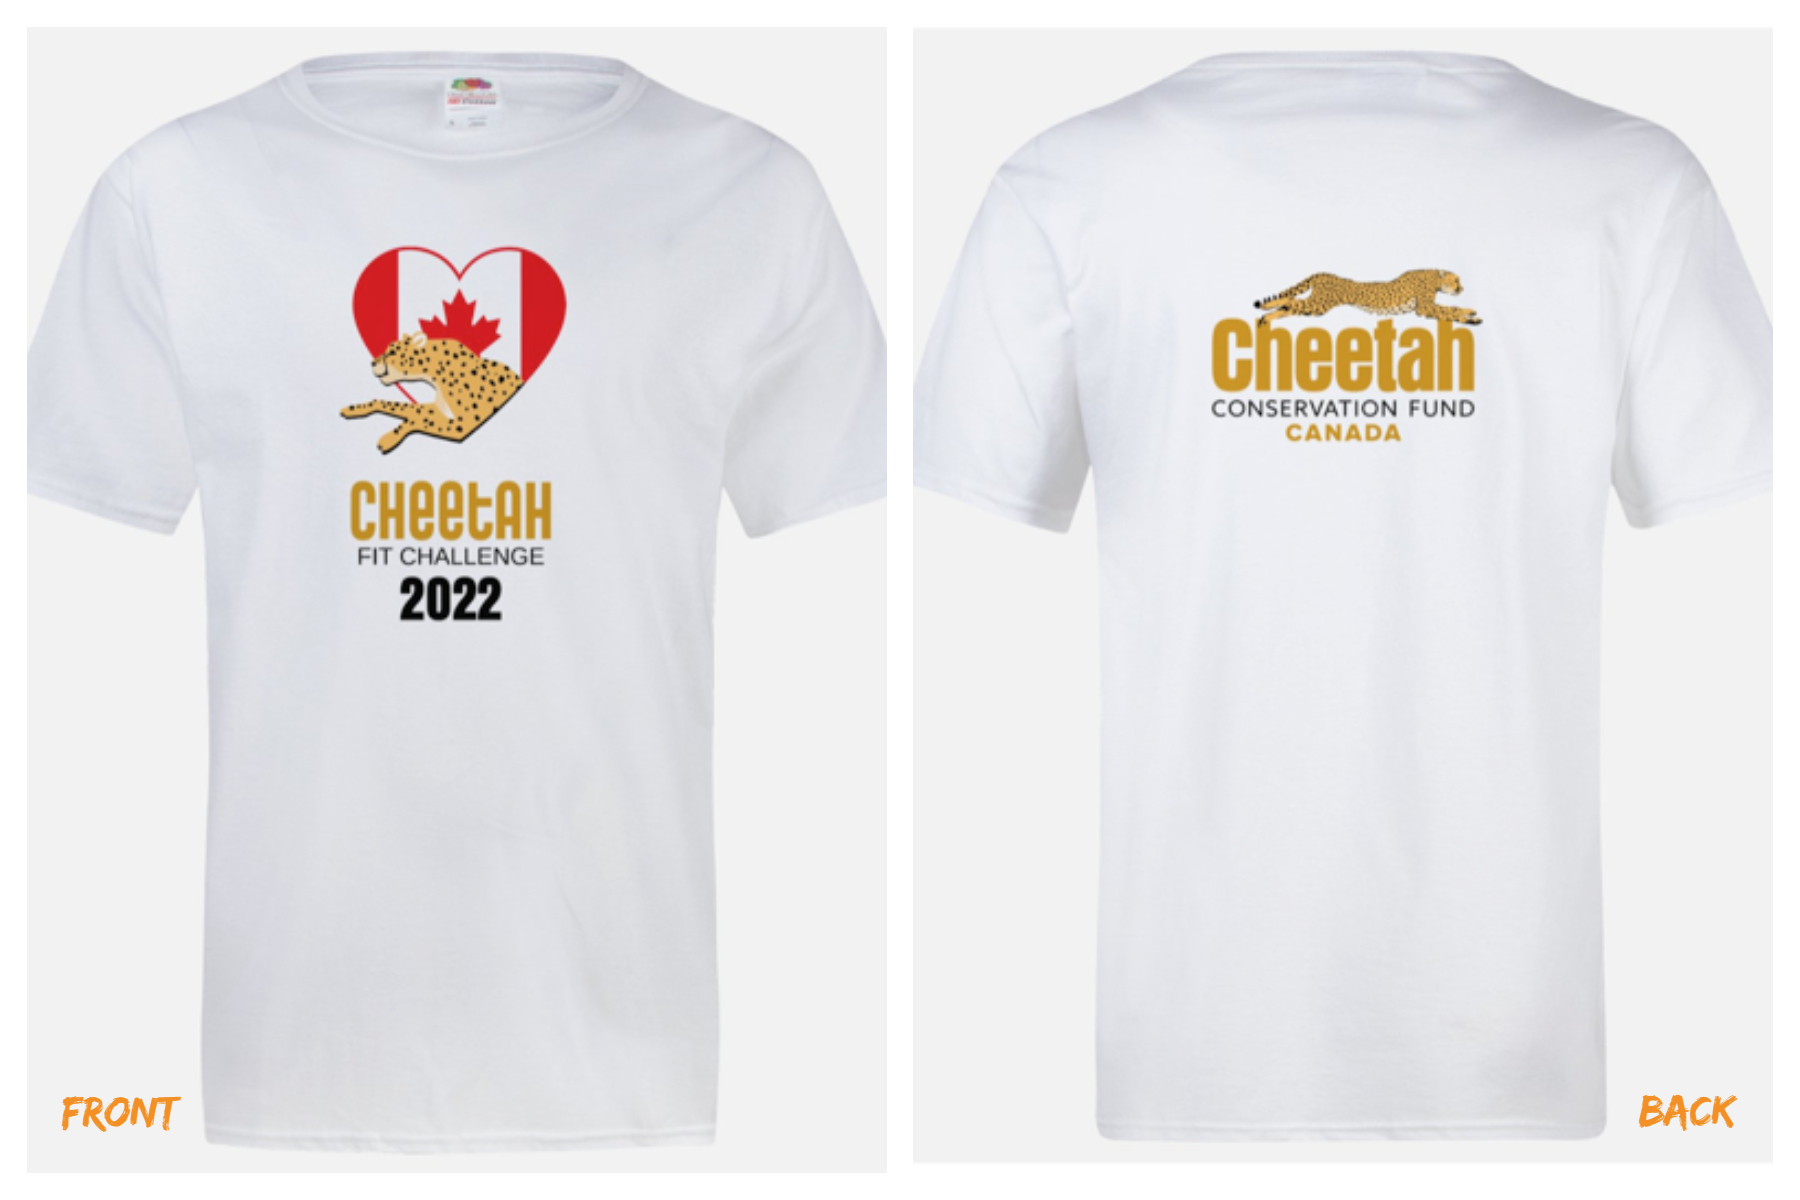 Official Tshirt of the Cheetah Fit Challenge 2022